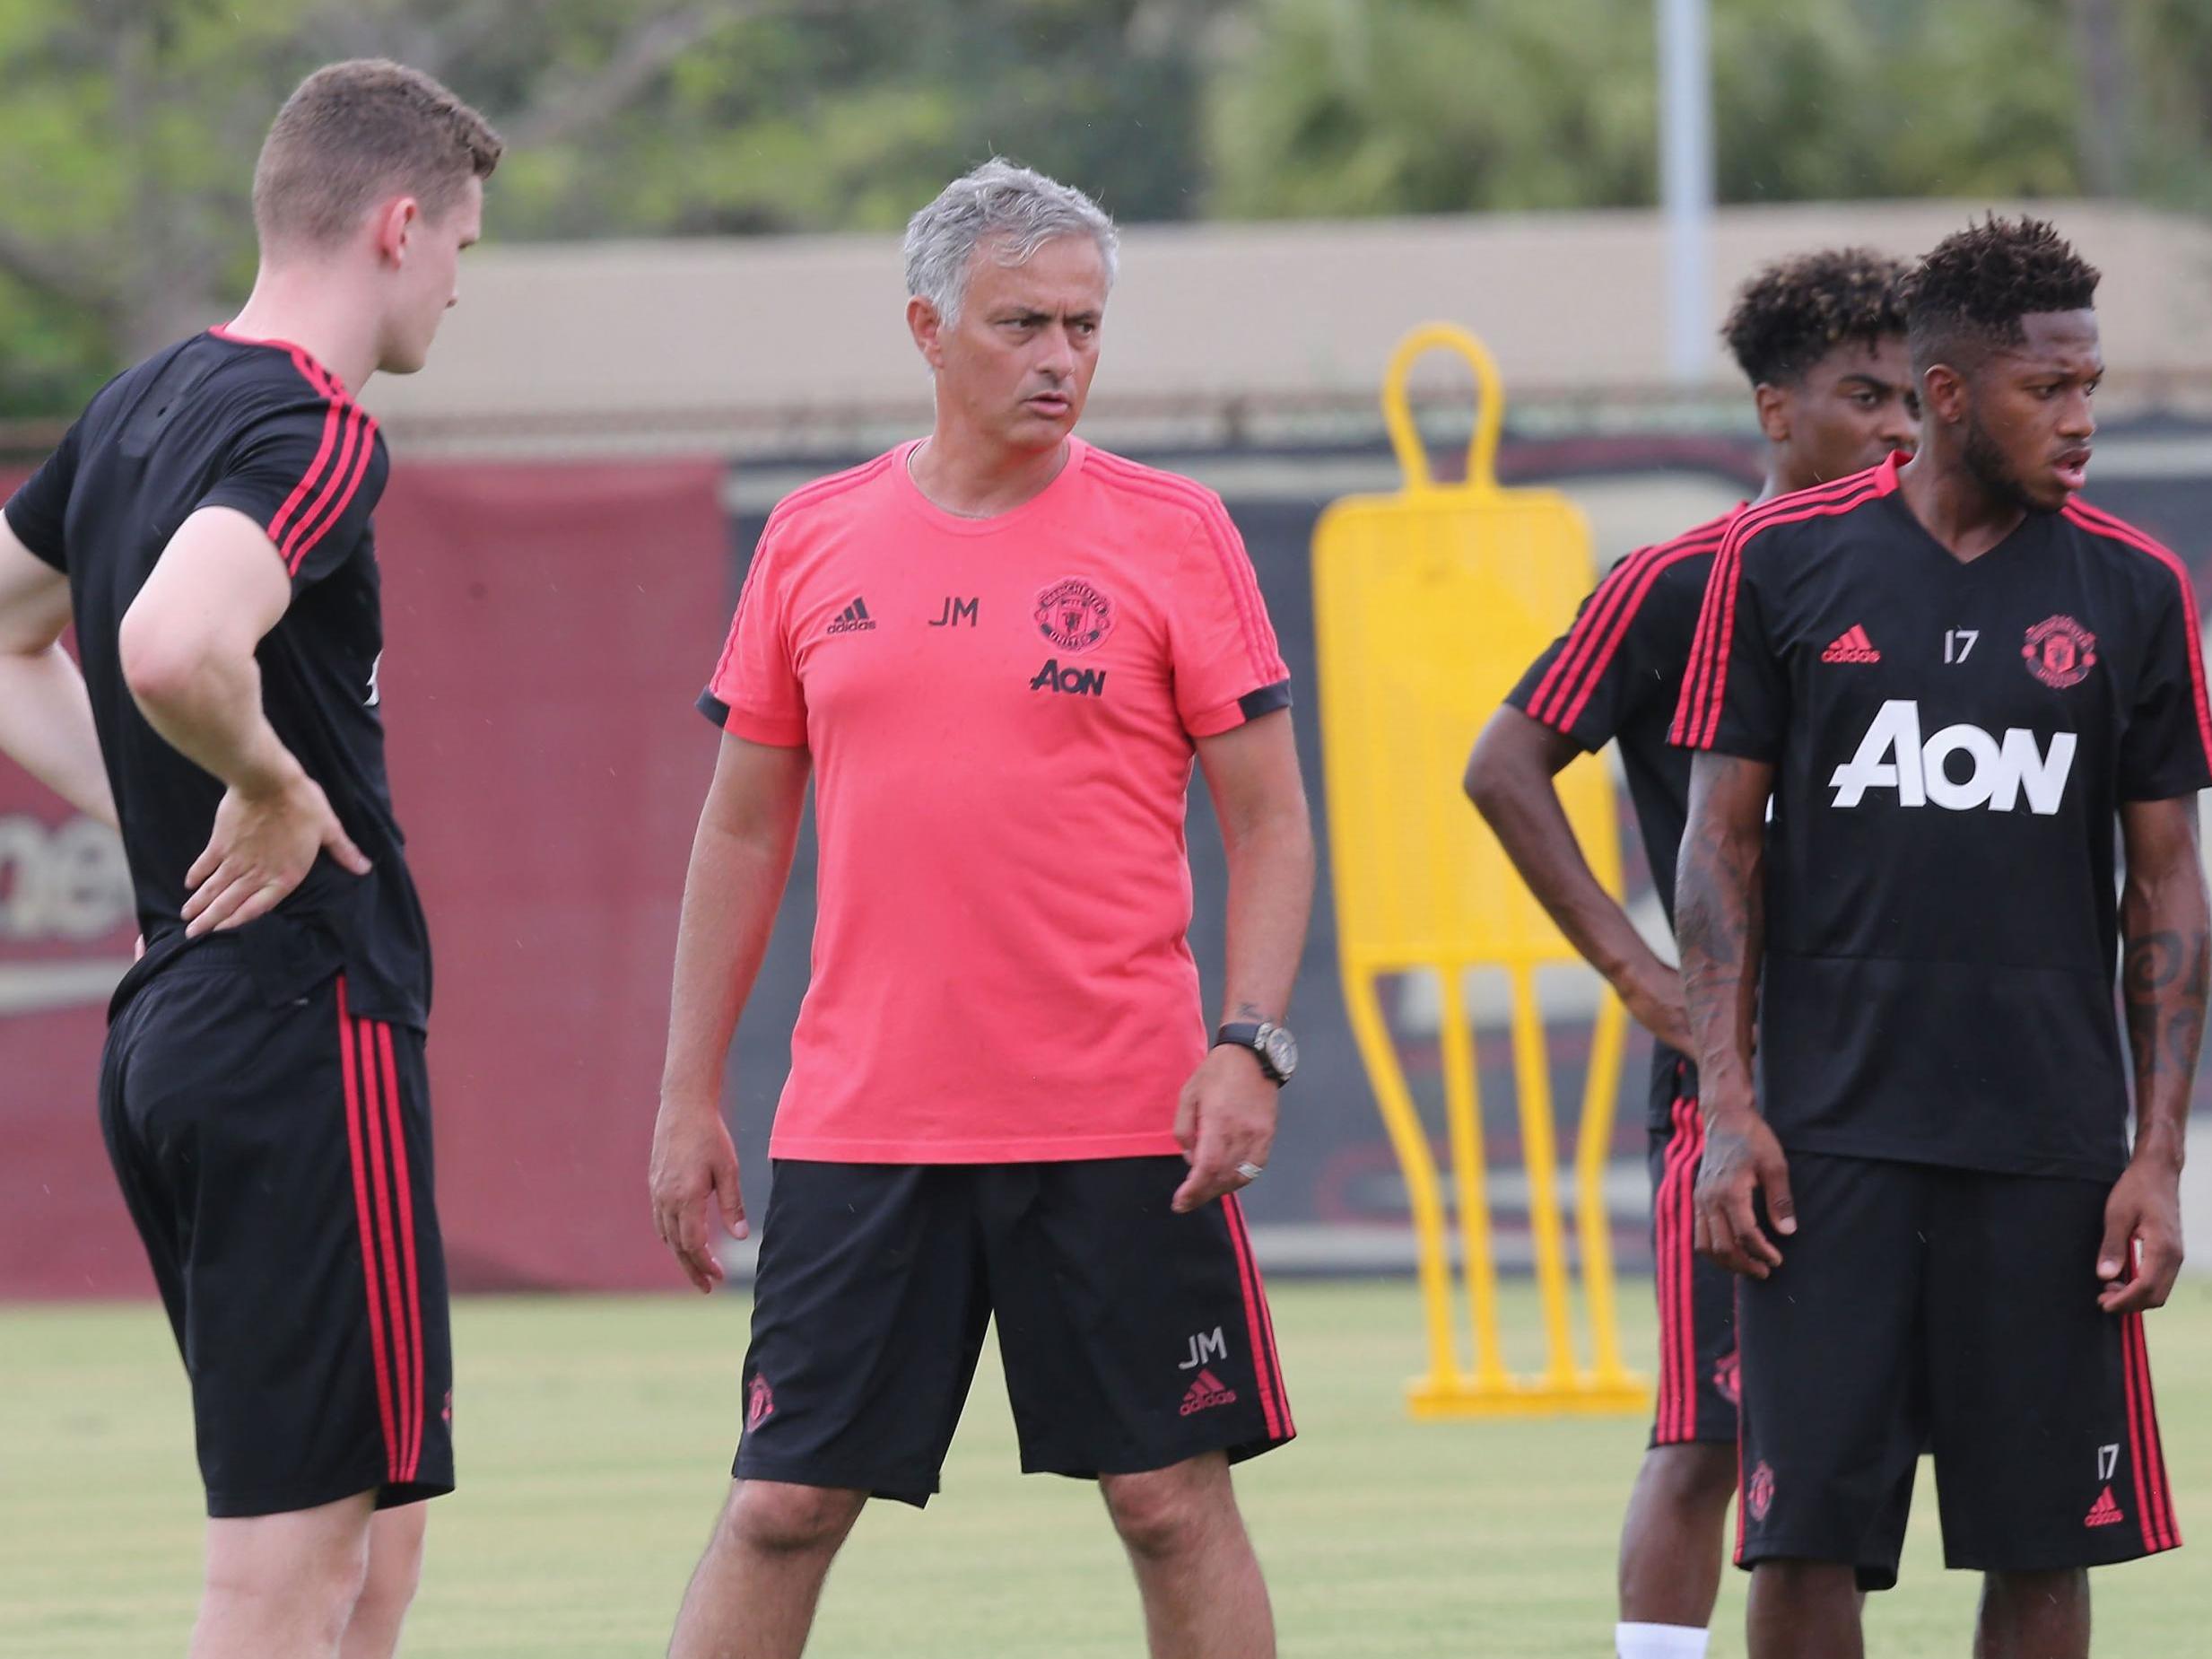 A particular focus of Jose Mourinho's ire has been the World Cup, which he claims has decimated his squad